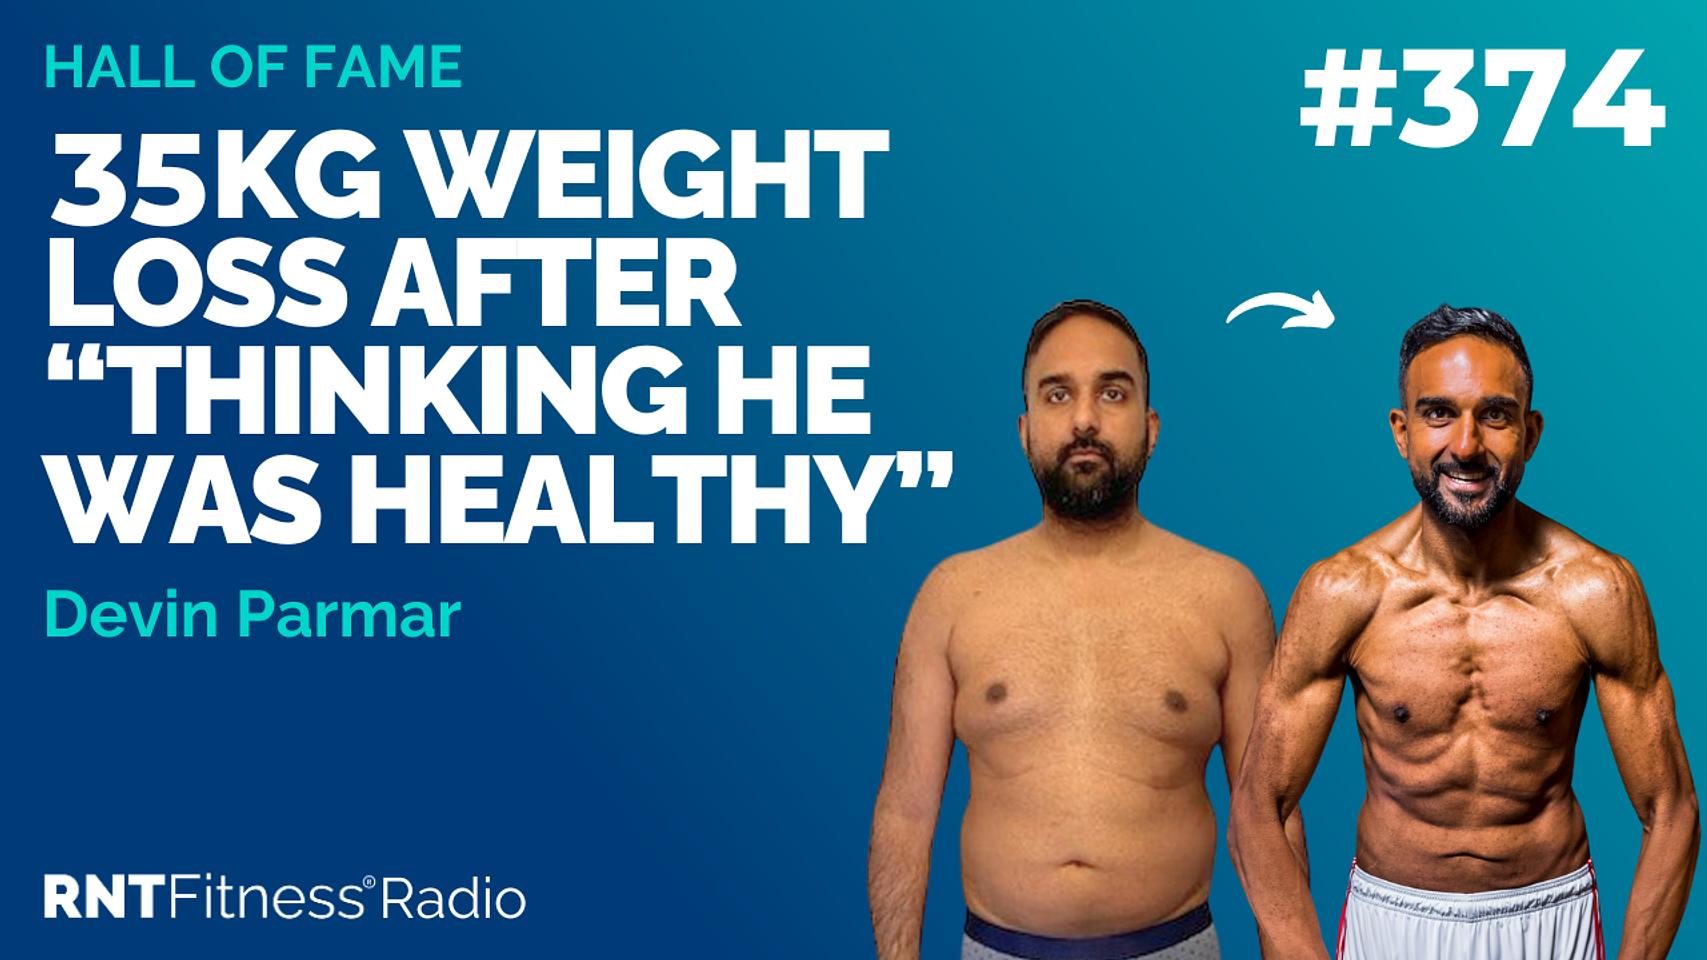 Ep 374- Hall Of Fame | Devin Parmar: 35kg WEIGHT LOSS After “Thinking He Was Healthy”